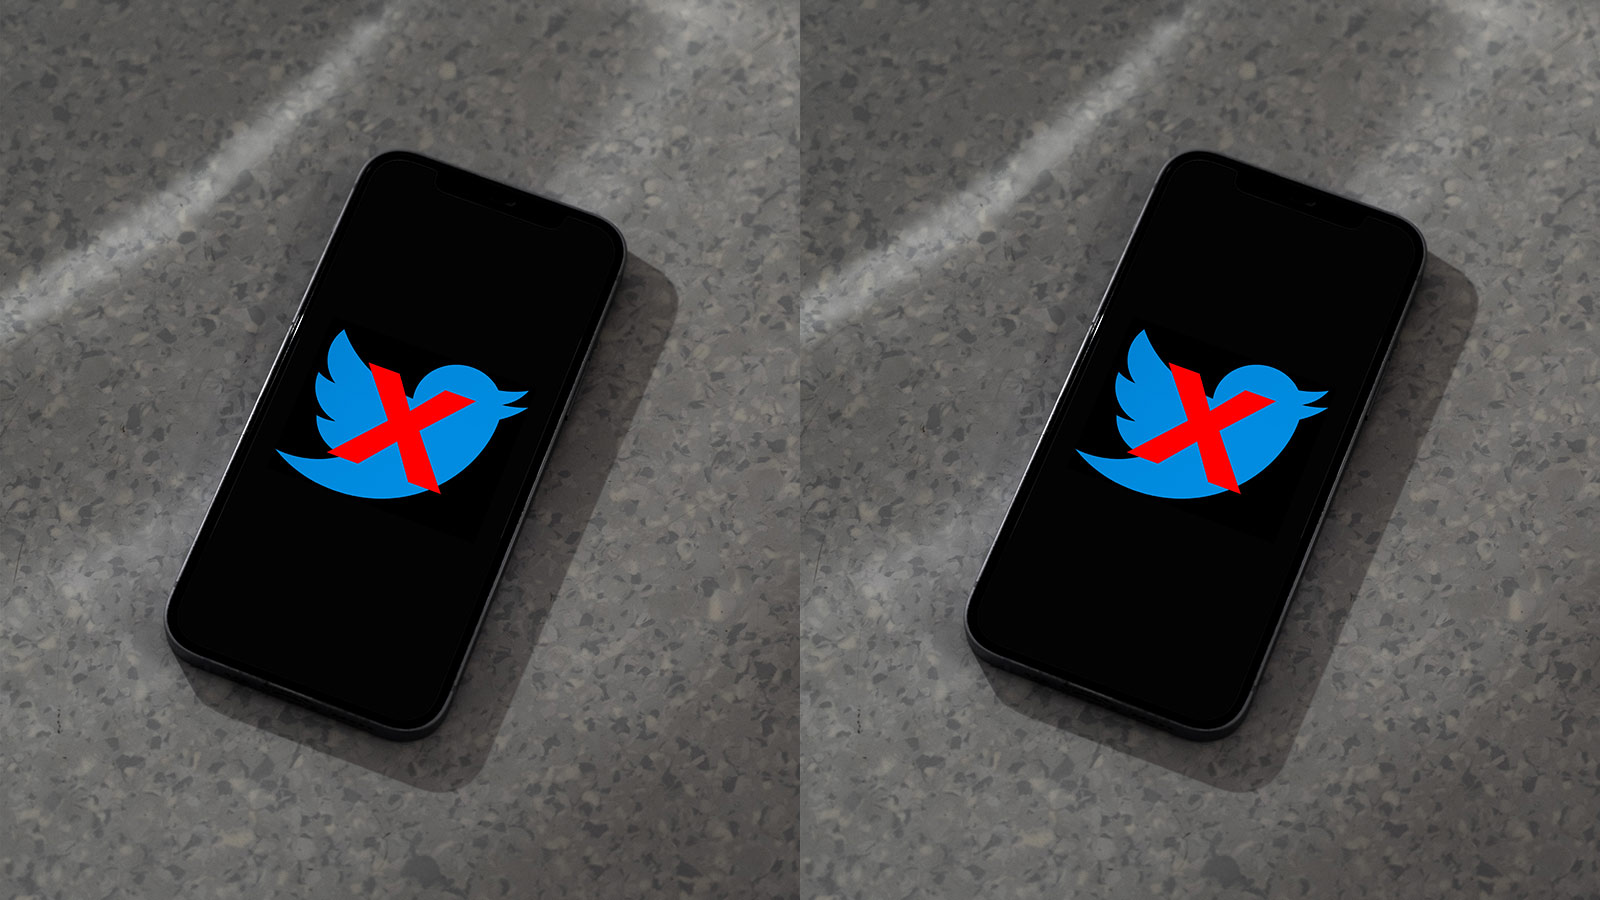 A mobile phone displaying the Twitter logo with a red X over it, signifying the end of Twitter